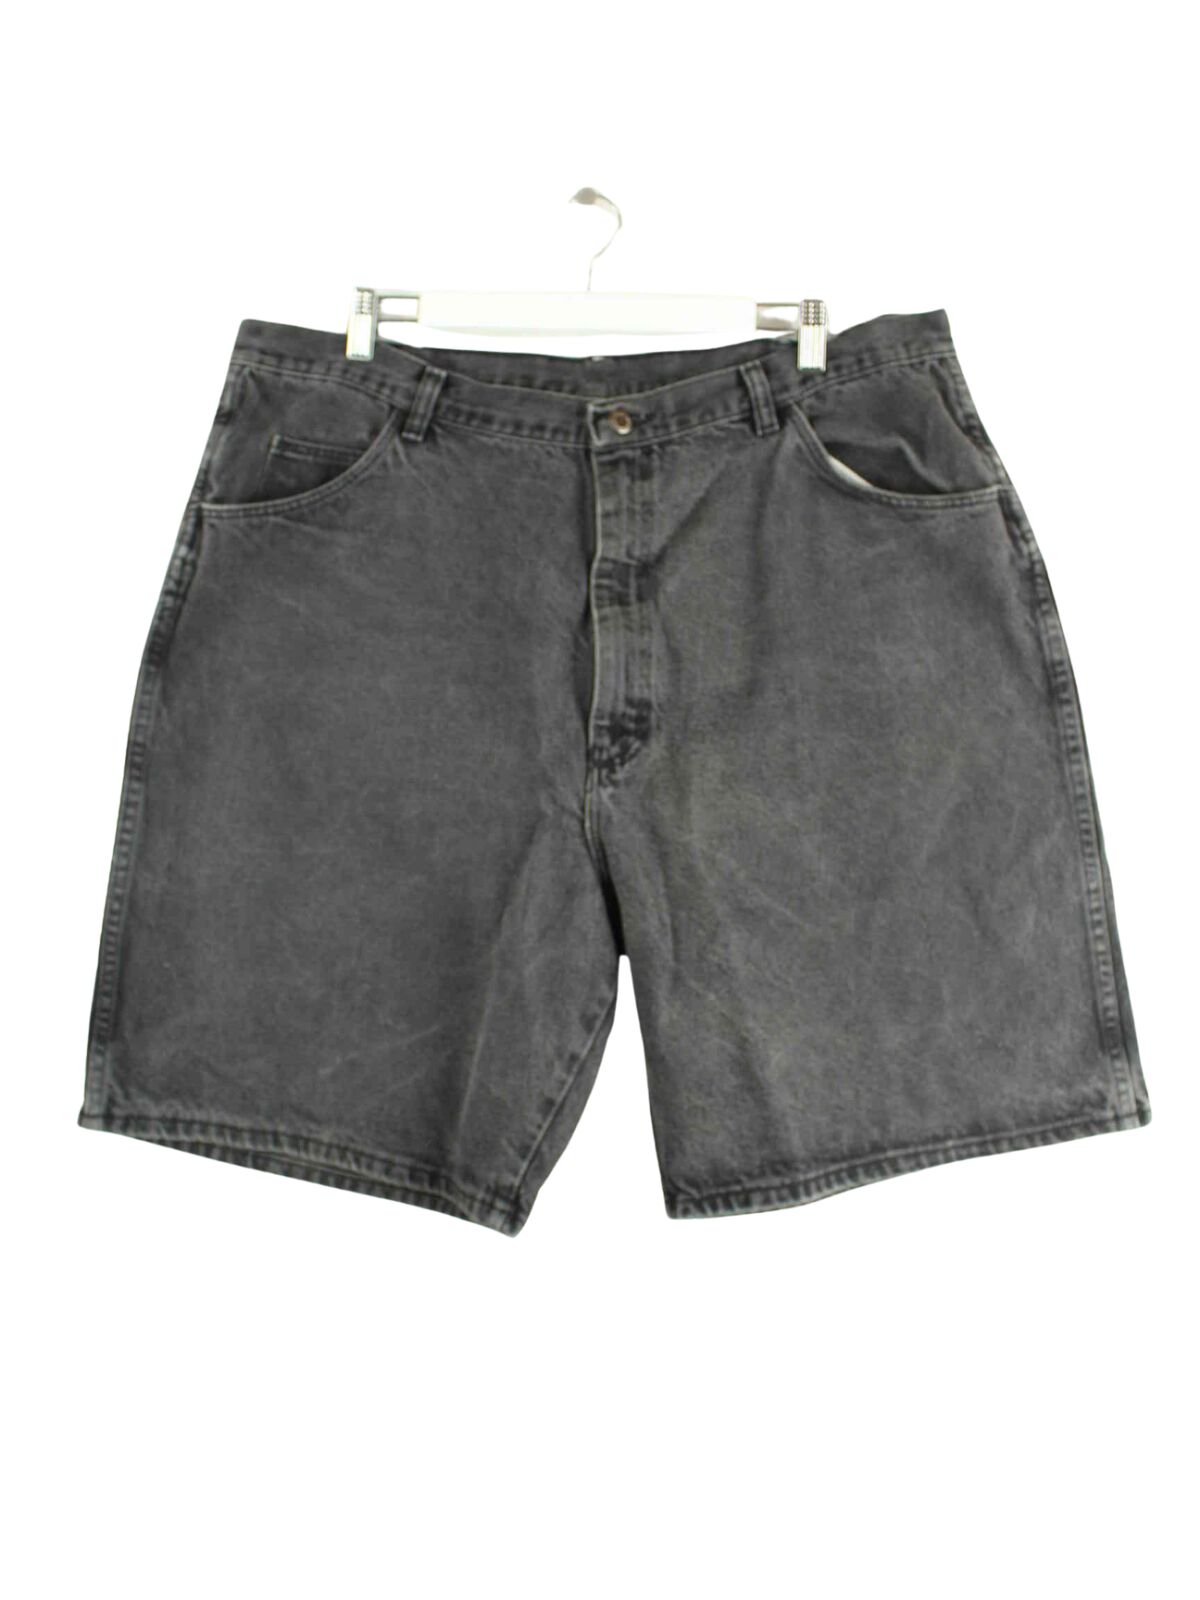 Wrangler Relaxed Fit Shorts Grau W40 (front image)